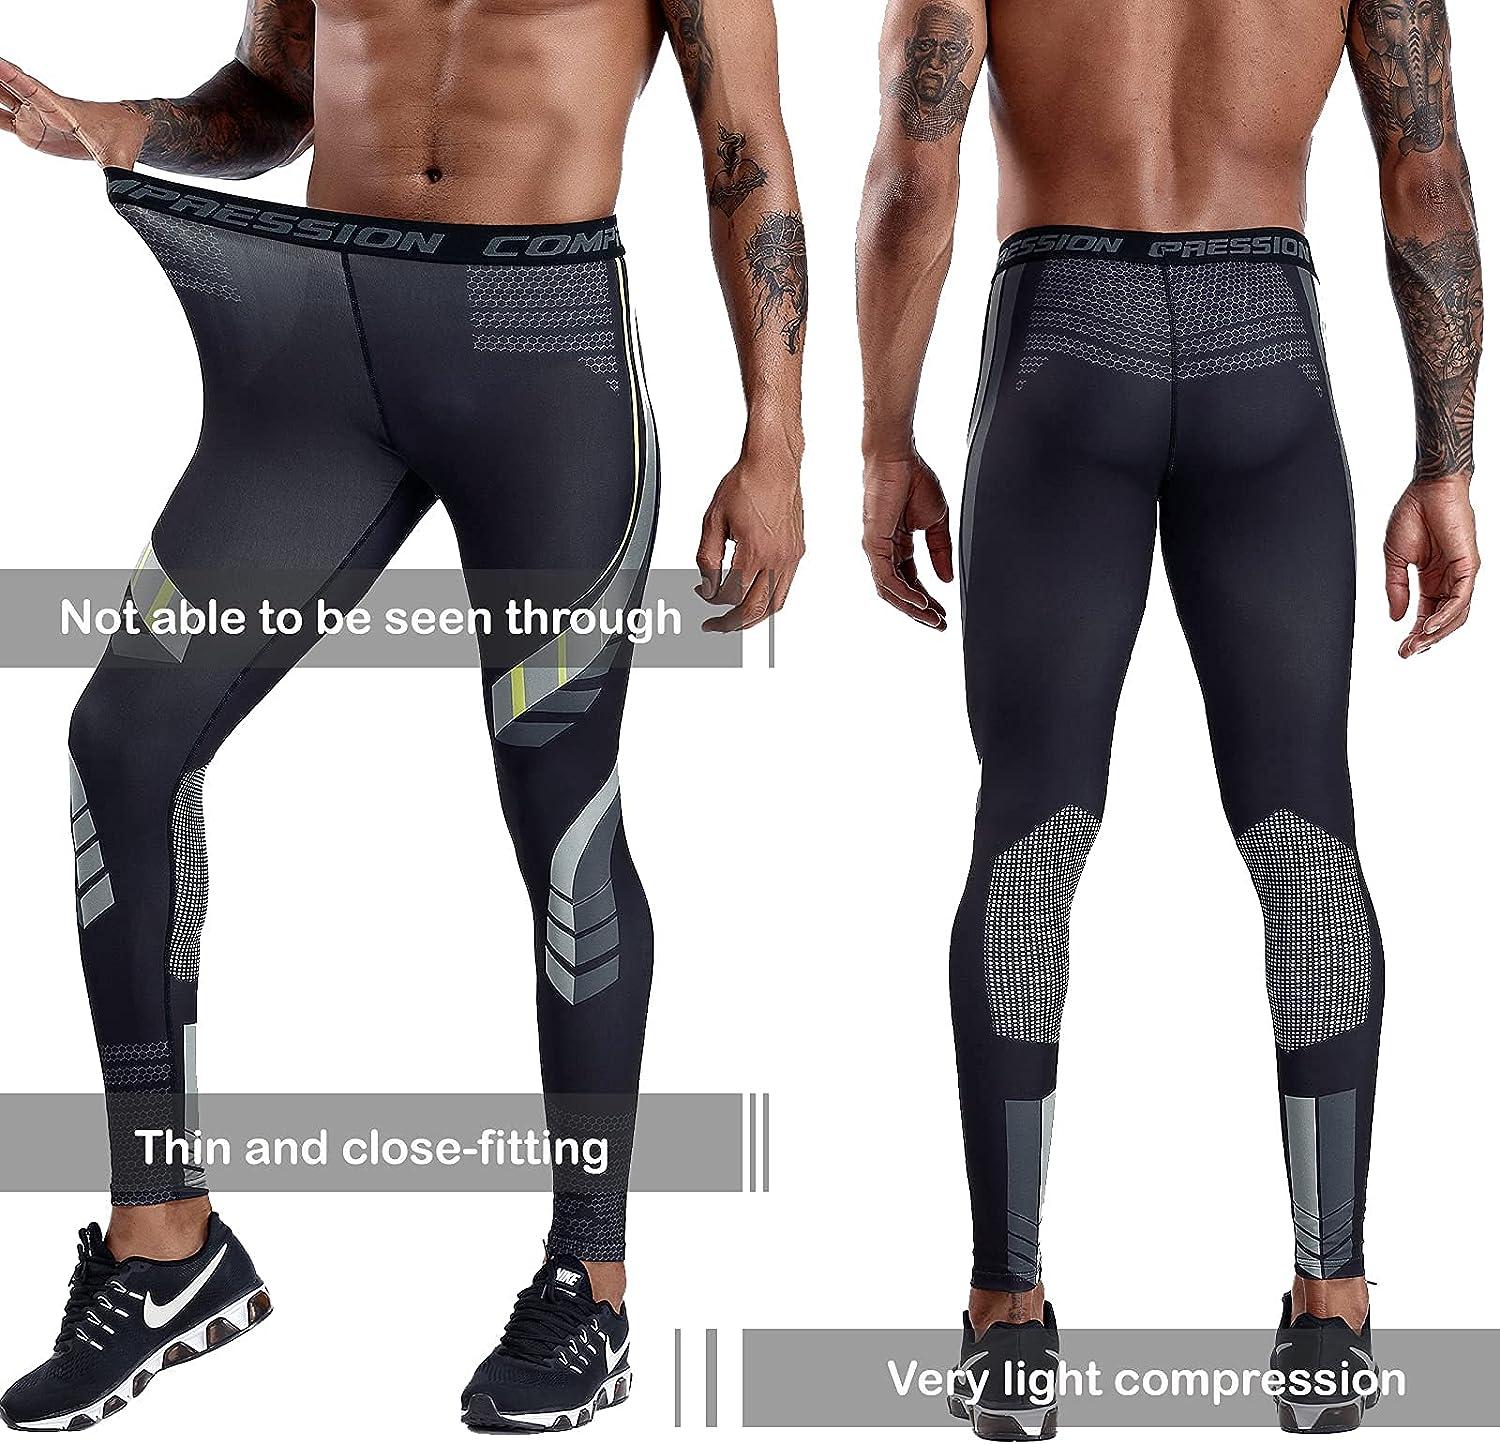 OEBLD Mens 2 in 1 Athletic Running Pants Quick Dry India